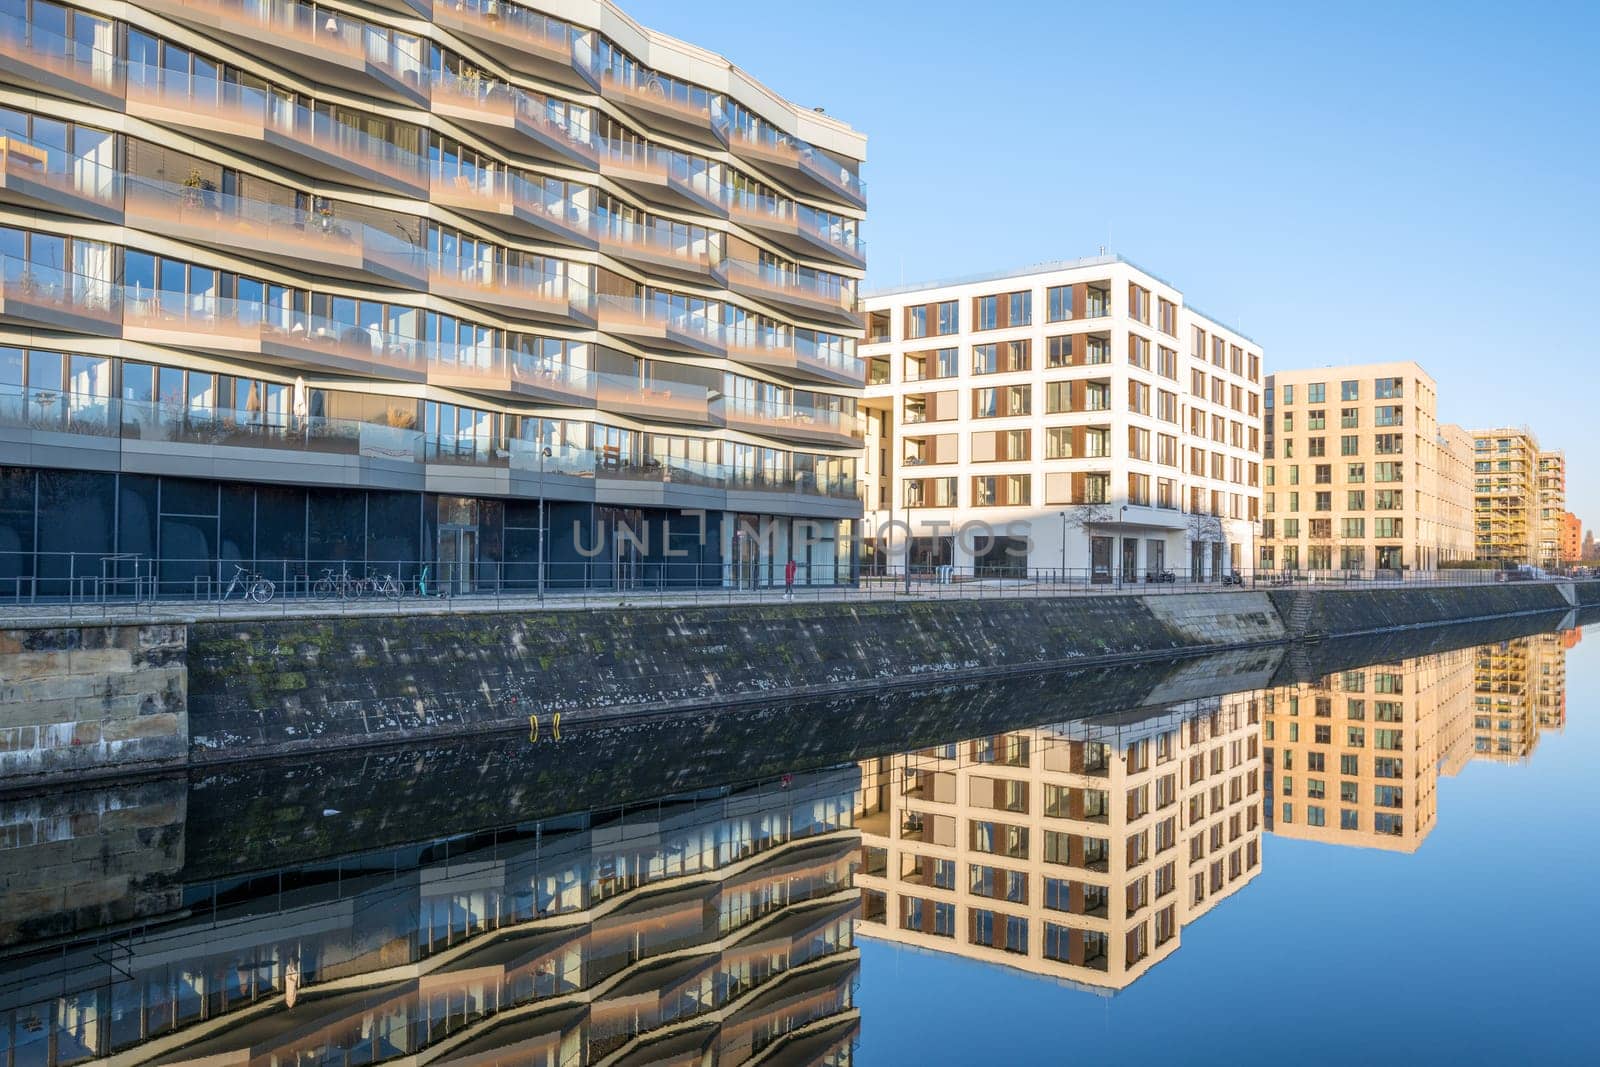 Modern apartment buildings in Berlin with a reflection in a small canal